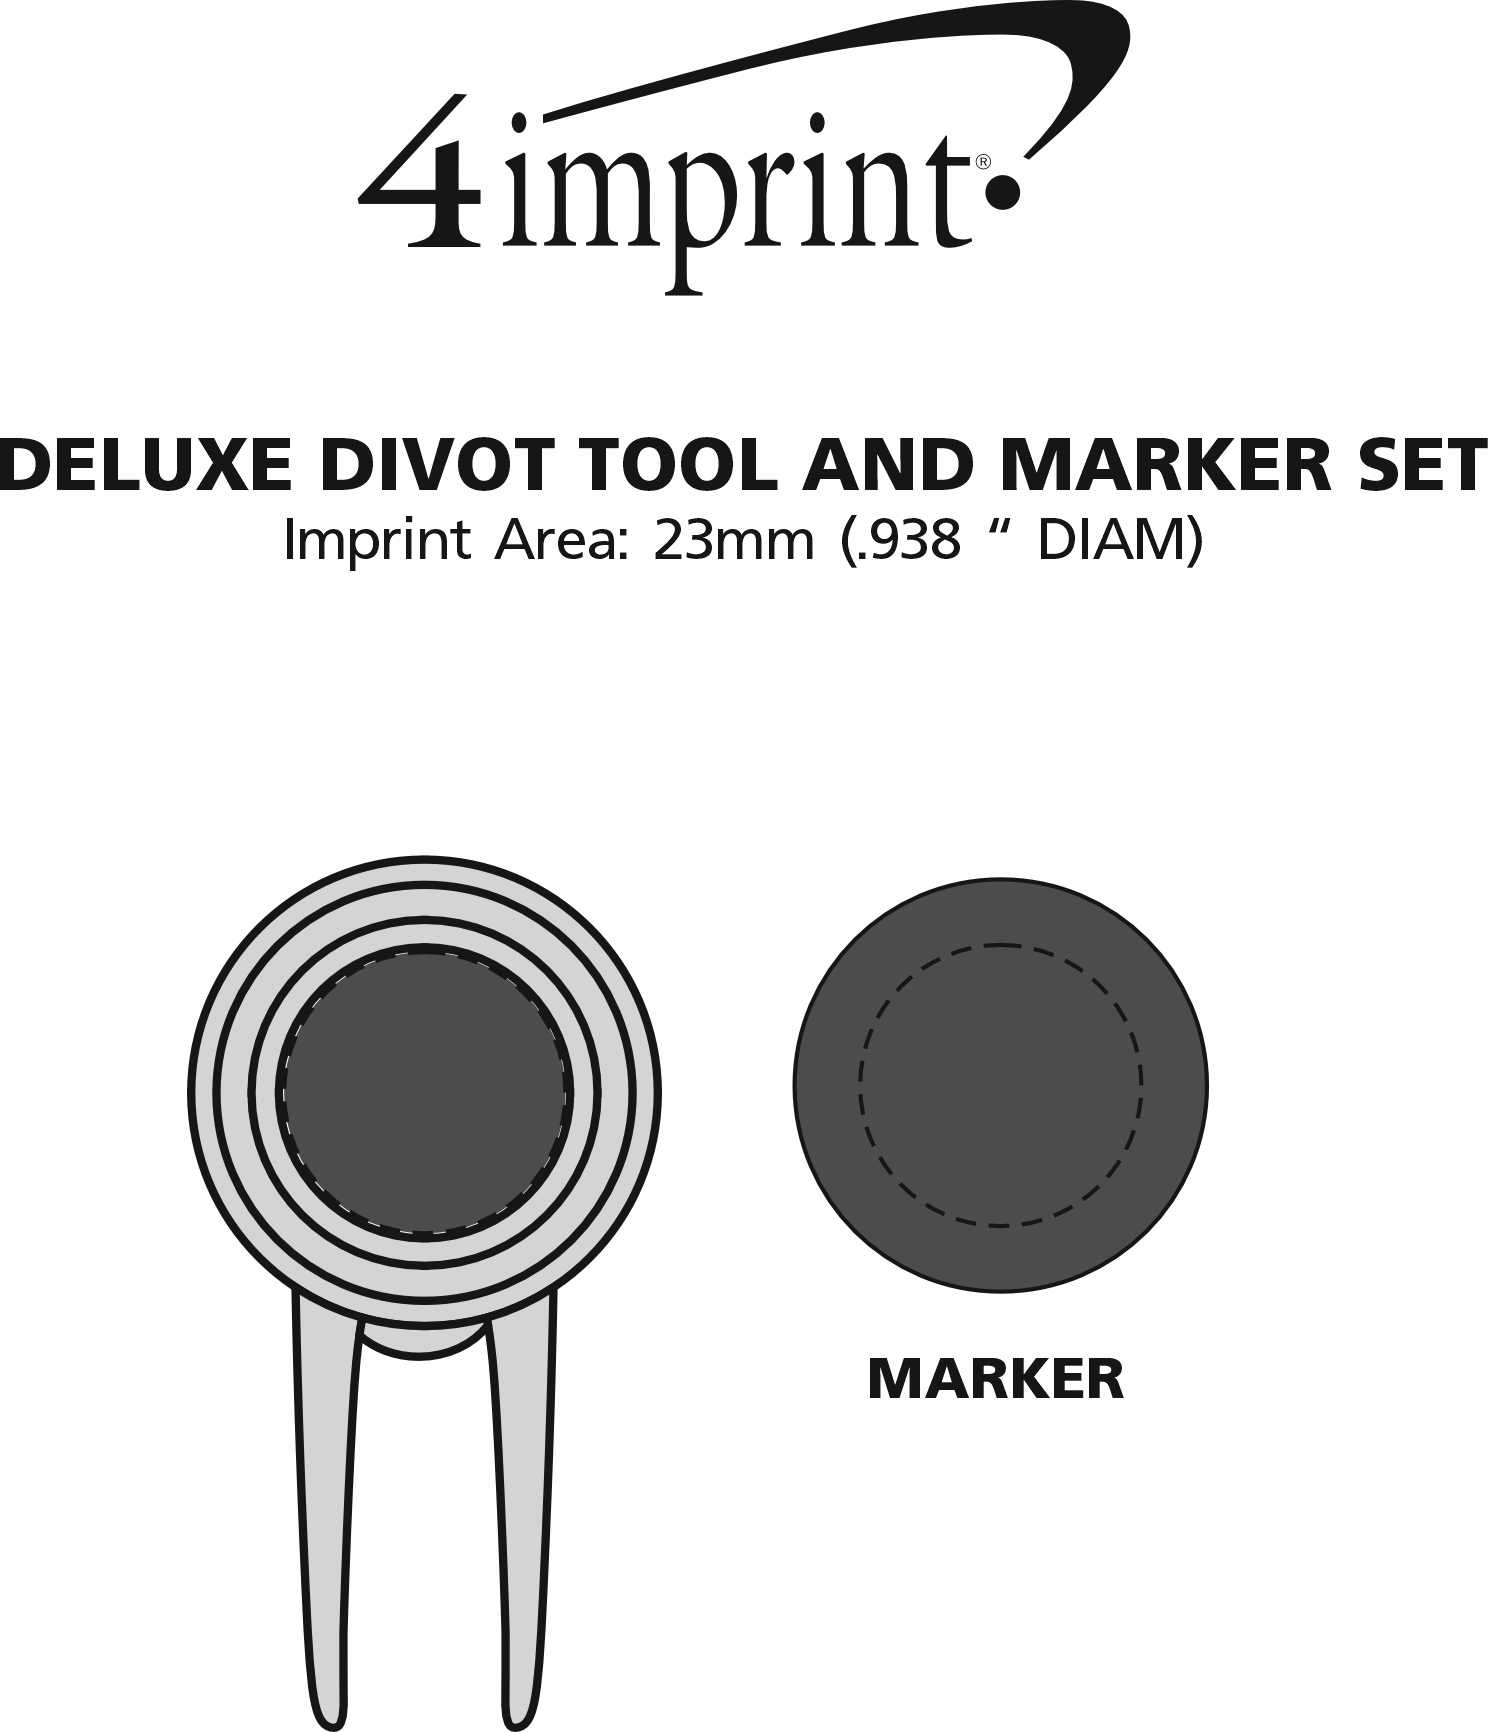 Imprint Area of Deluxe Divot Tool and Marker Set